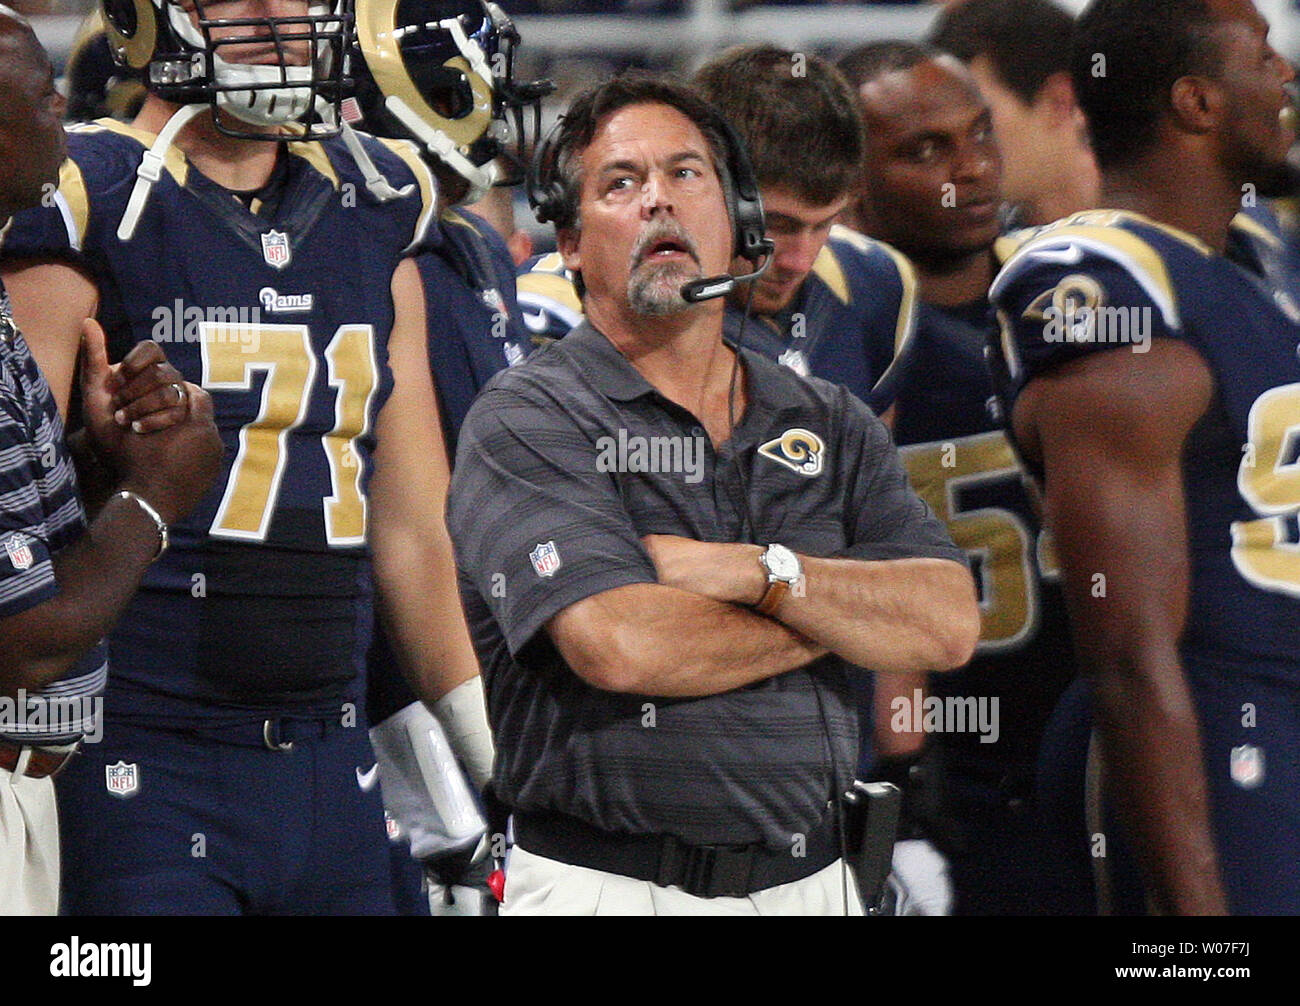 St. Louis Rams head football coach Jeff Fisher watches the video replay board during the first quarer against the New Orleans Saints at the Edward Jones Dome in St. Louis on August 8, 2014.  UPI/Bill Greenblatt Stock Photo